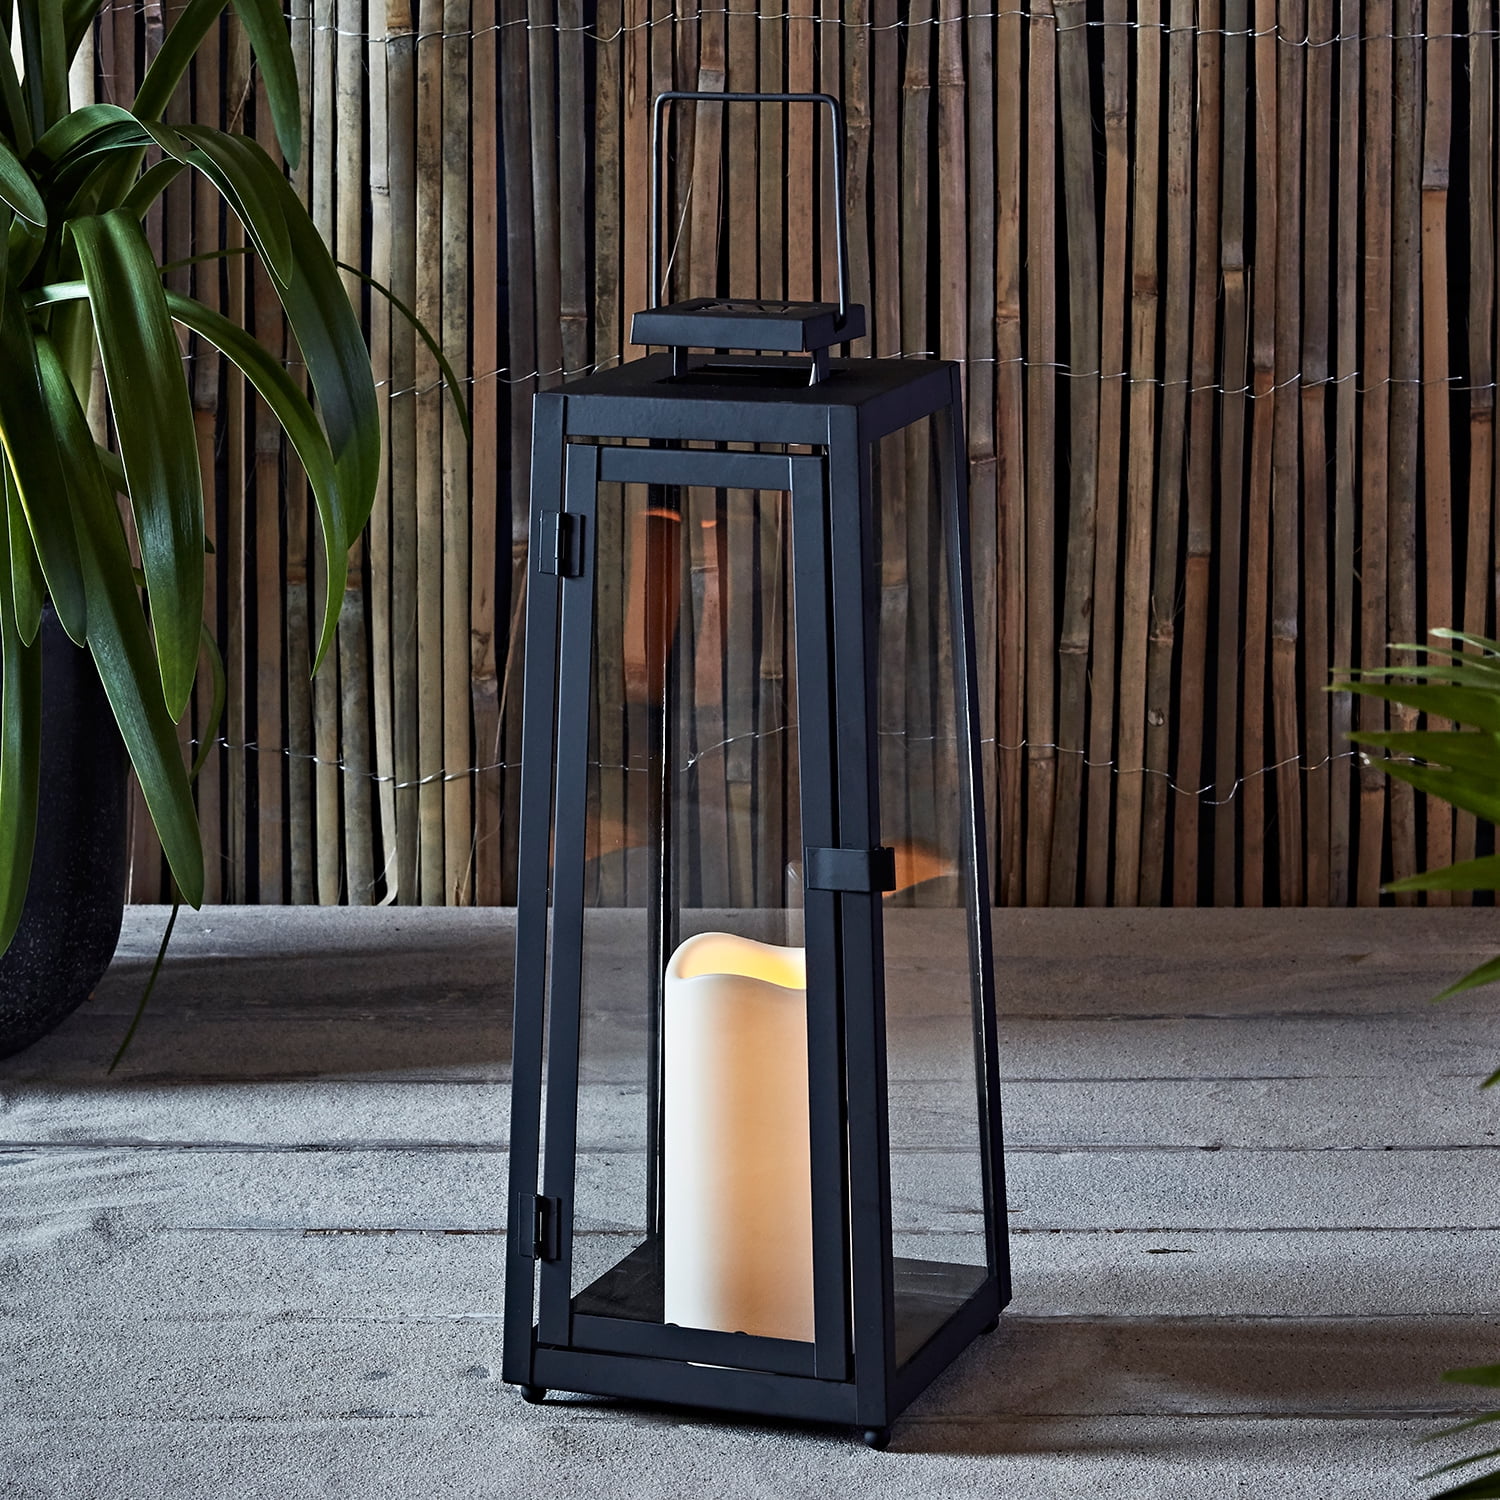  Lights4fun, Inc. 14” Black Metal Battery Operated LED Flameless Candle  Lantern Light for Indoor Outdoor Use : Tools & Home Improvement